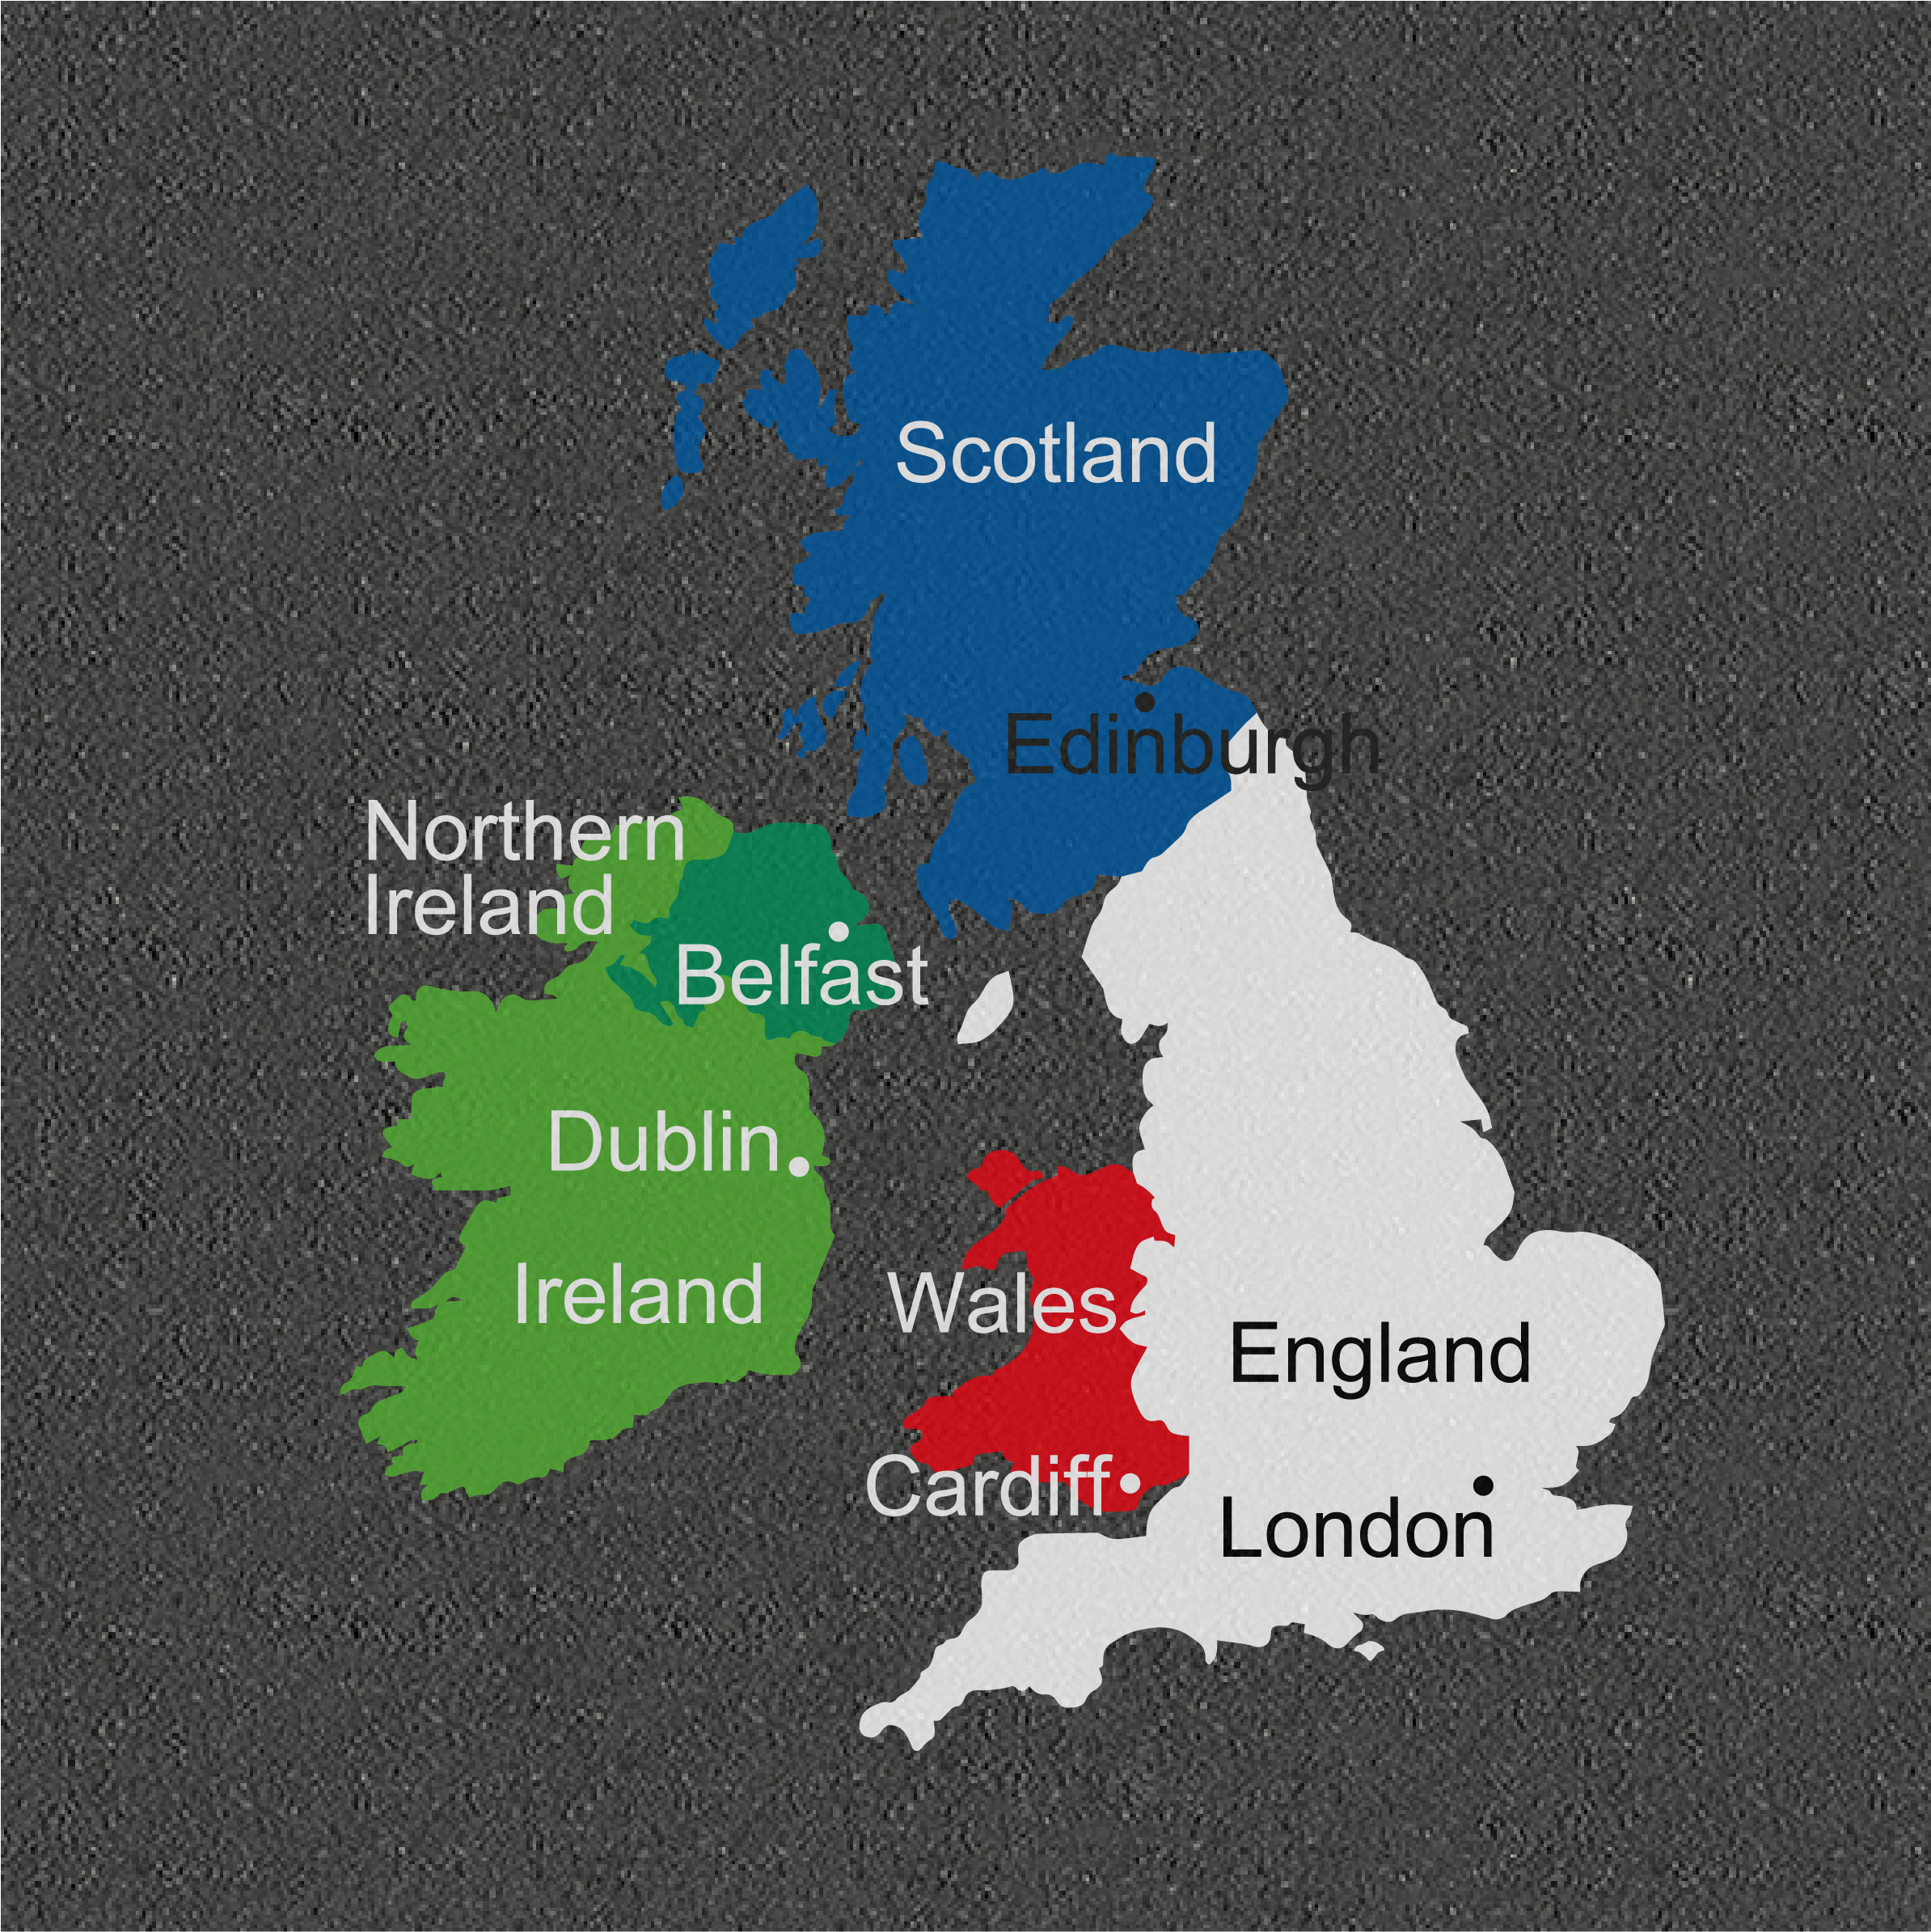 Northern ireland is a part of. The United Kingdom of great Britain and Northern Ireland карта. British Isles Map. Great Britain карта. Карта the uk of great Britain and Northern Ireland.